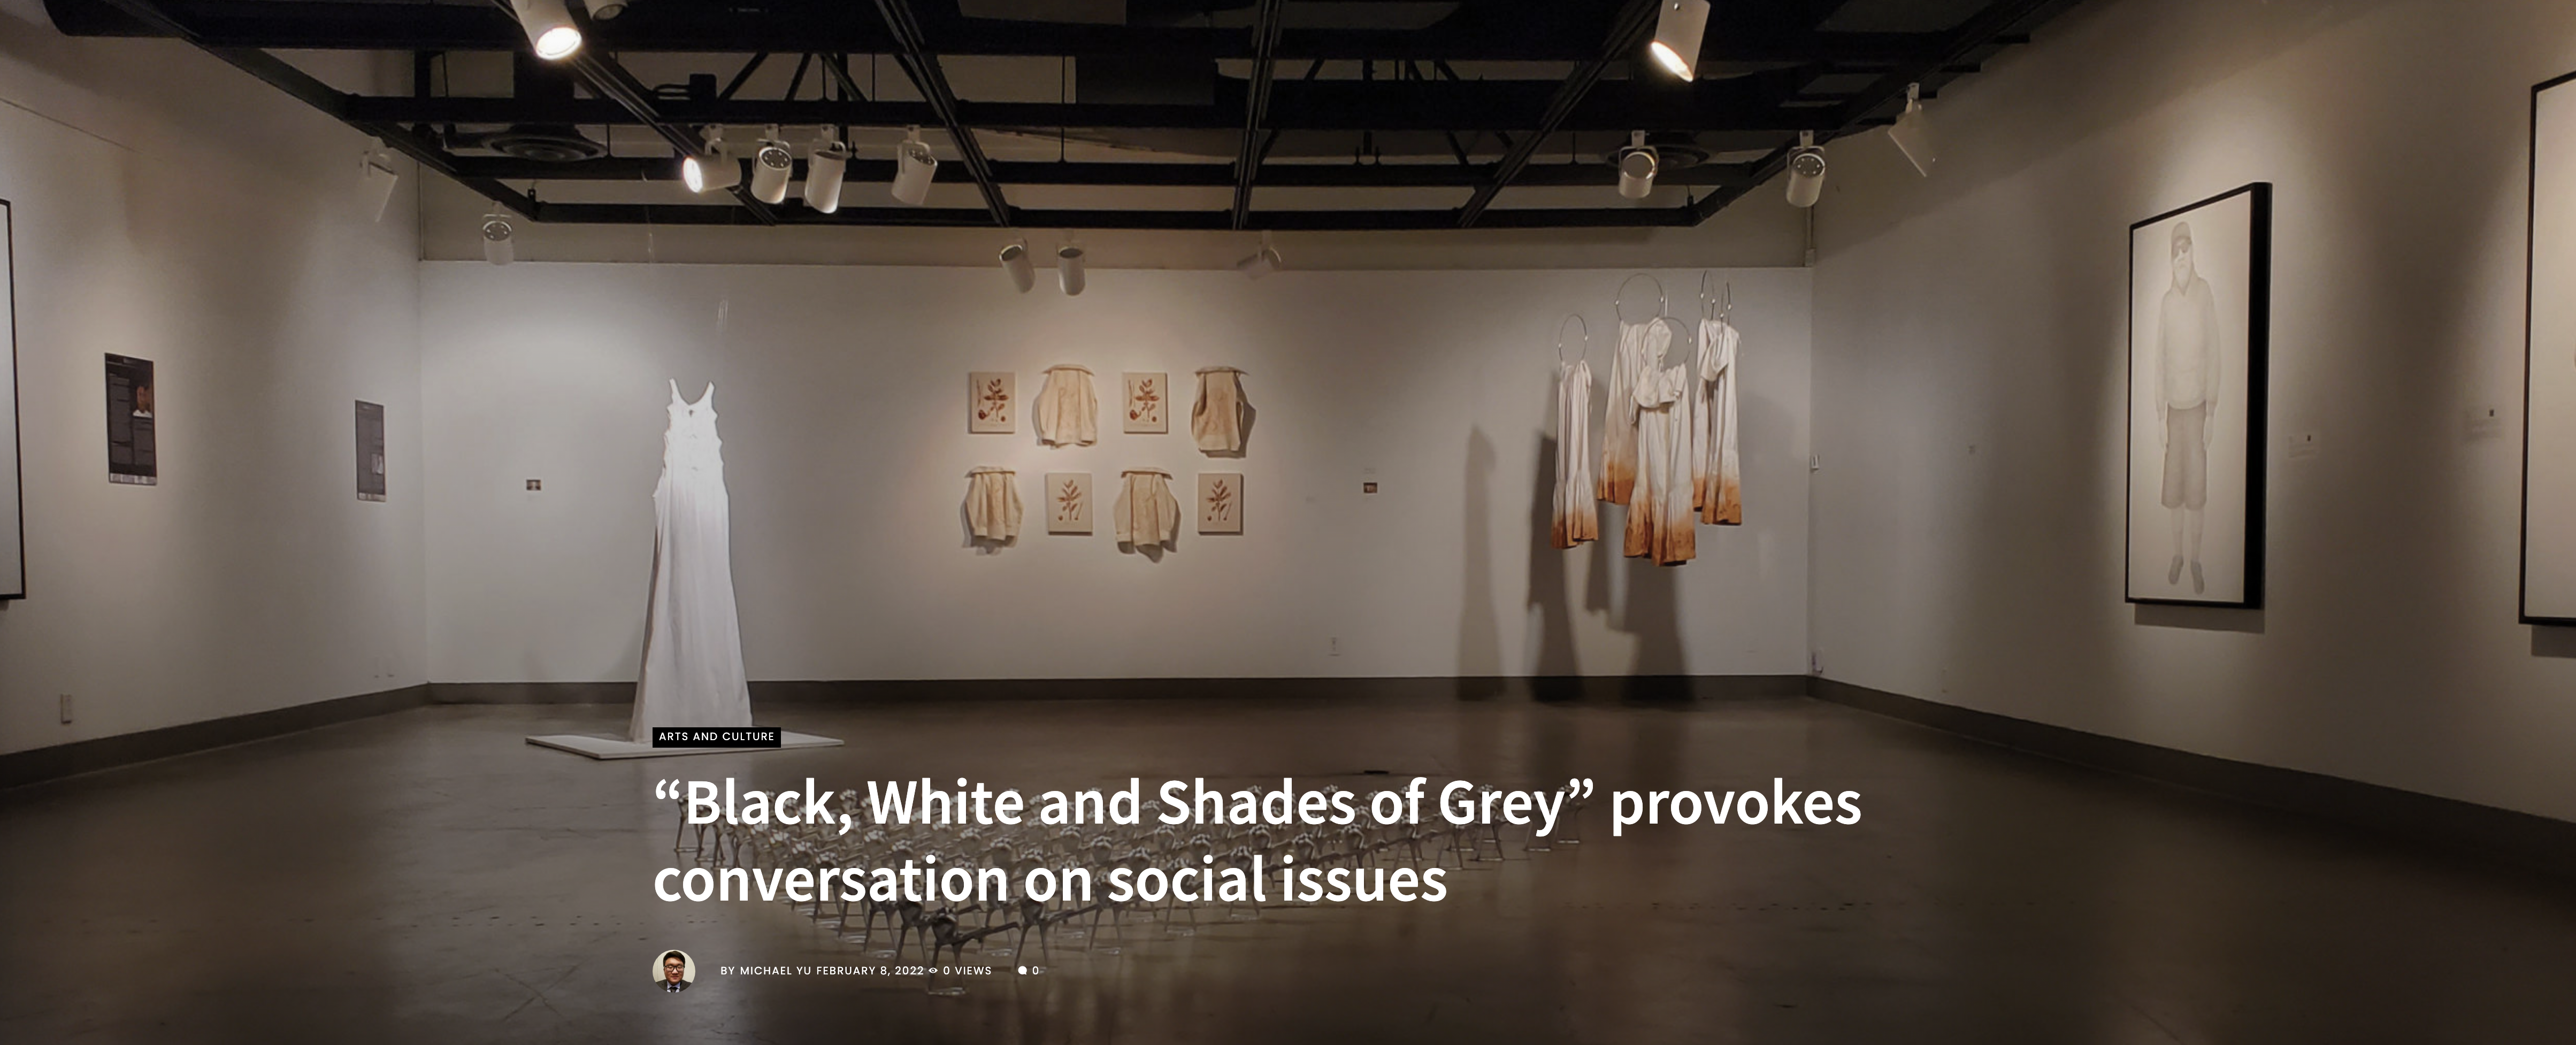 “Black, White and Shades of Grey” provokes conversation on social issues